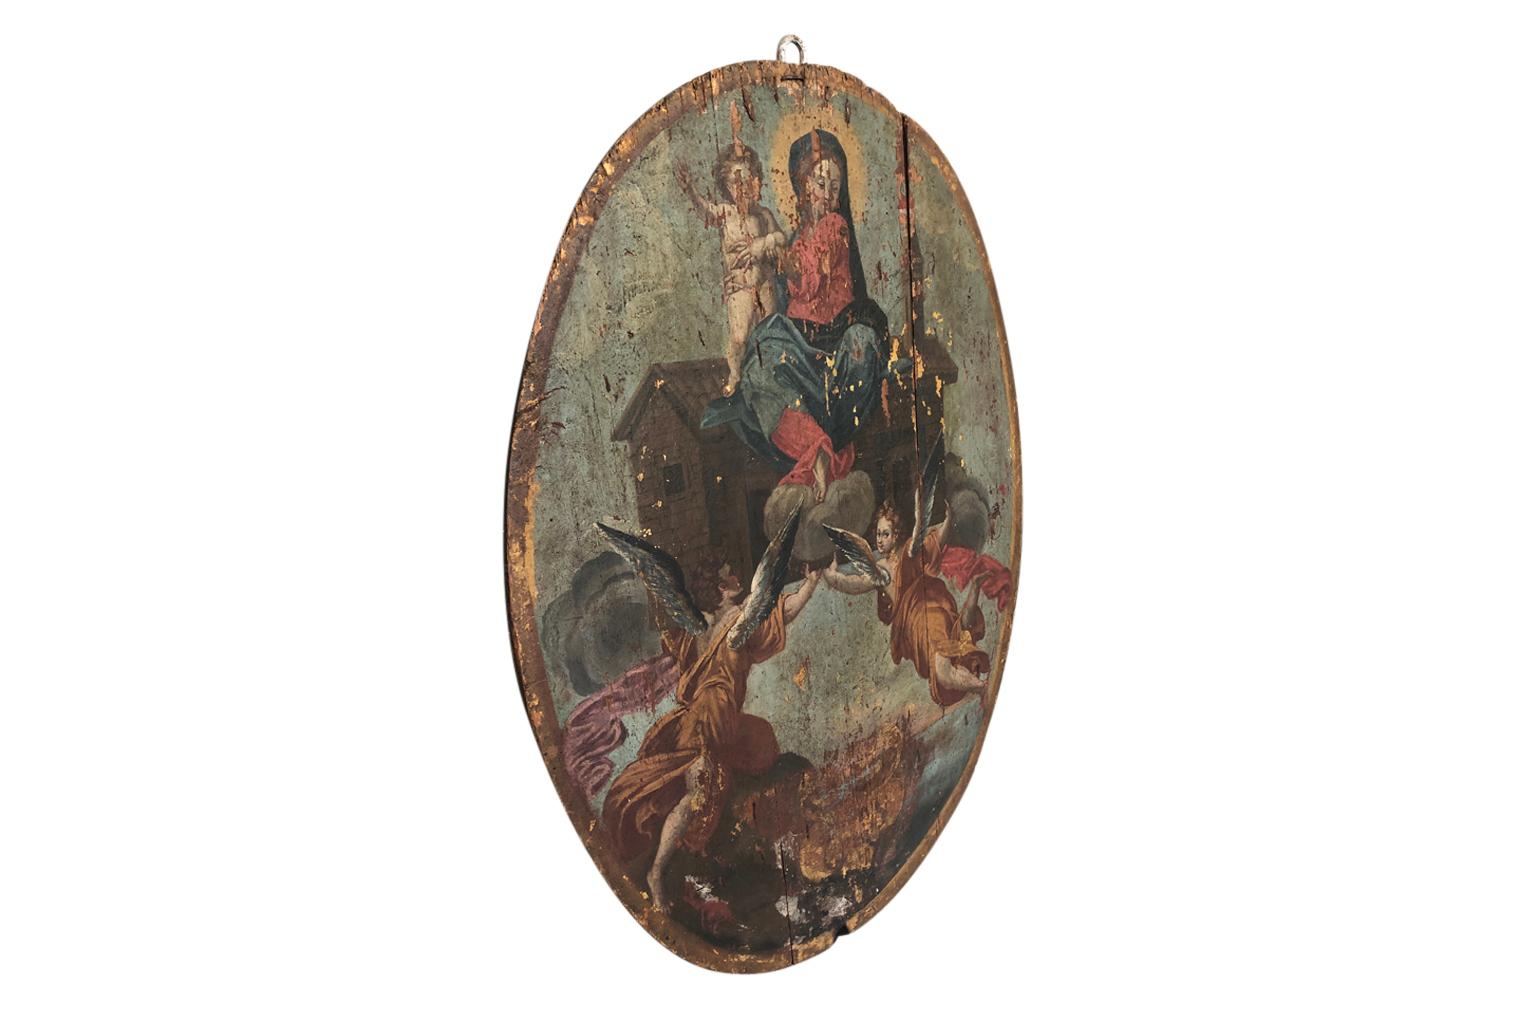 An outstanding and grand 17th century Baroque oil painting on an oval wooden panel of the Madonna and Child. Beautifully executed and stunning patina.